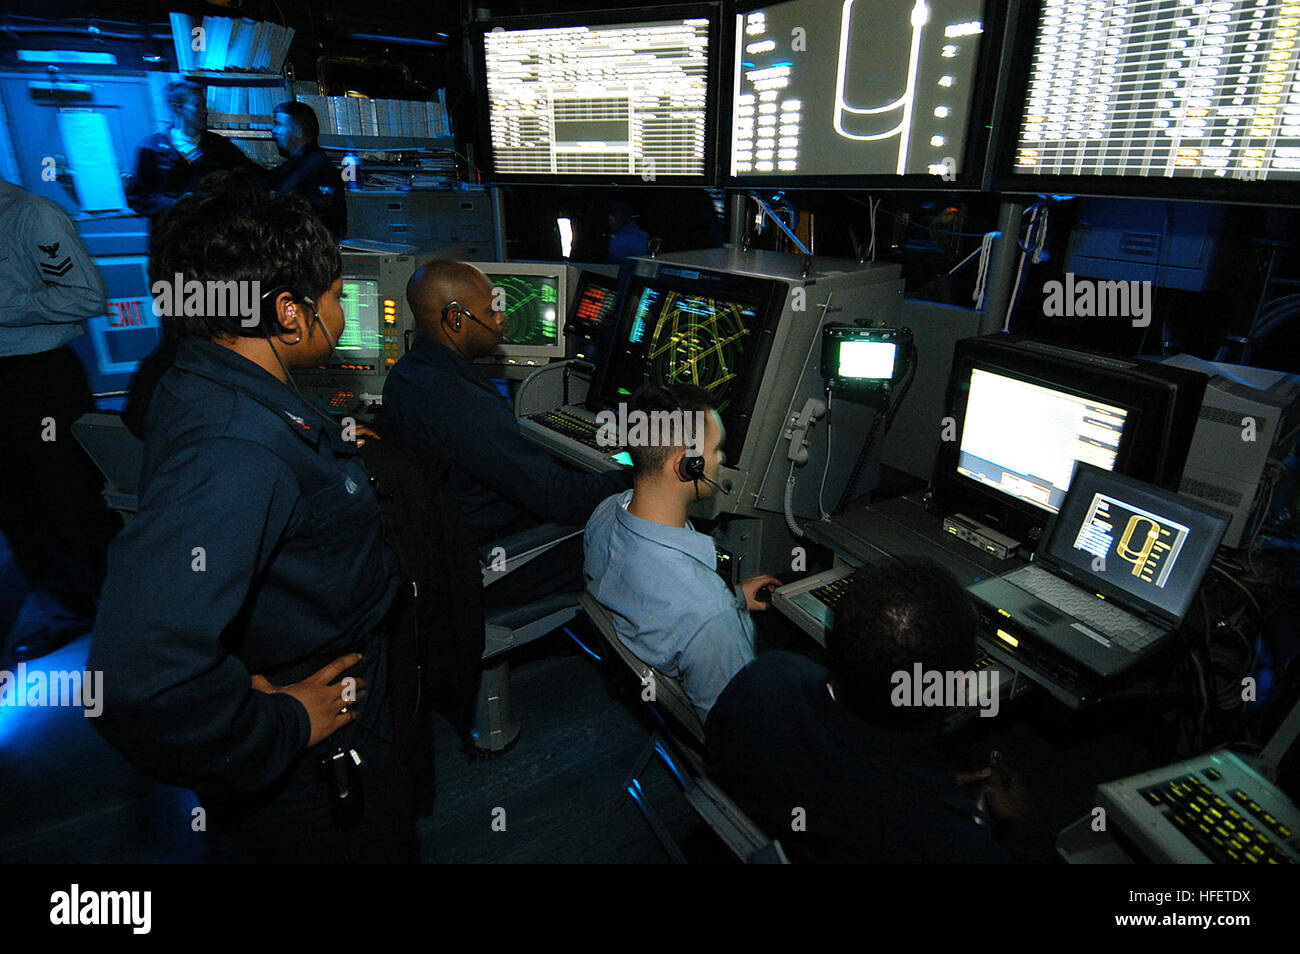 031217-N-6278K-001  Atlantic Ocean (Dec. 17, 2003) -- Air Traffic Controllers man the Carrier Air Traffic Control Center (CATCC) during flight operations aboard USS George Washington (CVN 73).  The Norfolk, Va.-based nuclear powered aircraft carrier is conducting Composite Training Unit Exercise (COMPTUEX) in the Atlantic Ocean, during preparations for an upcoming deployment.  U.S. Navy photo by PhotographerÕs Mate Airman Joan Kretschmer.  (RELEASED) US Navy 031217-N-6278K-001 Air Traffic Controllers man the Carrier Air Traffic Control Center (CATCC) during flight operations aboard USS George  Stock Photo